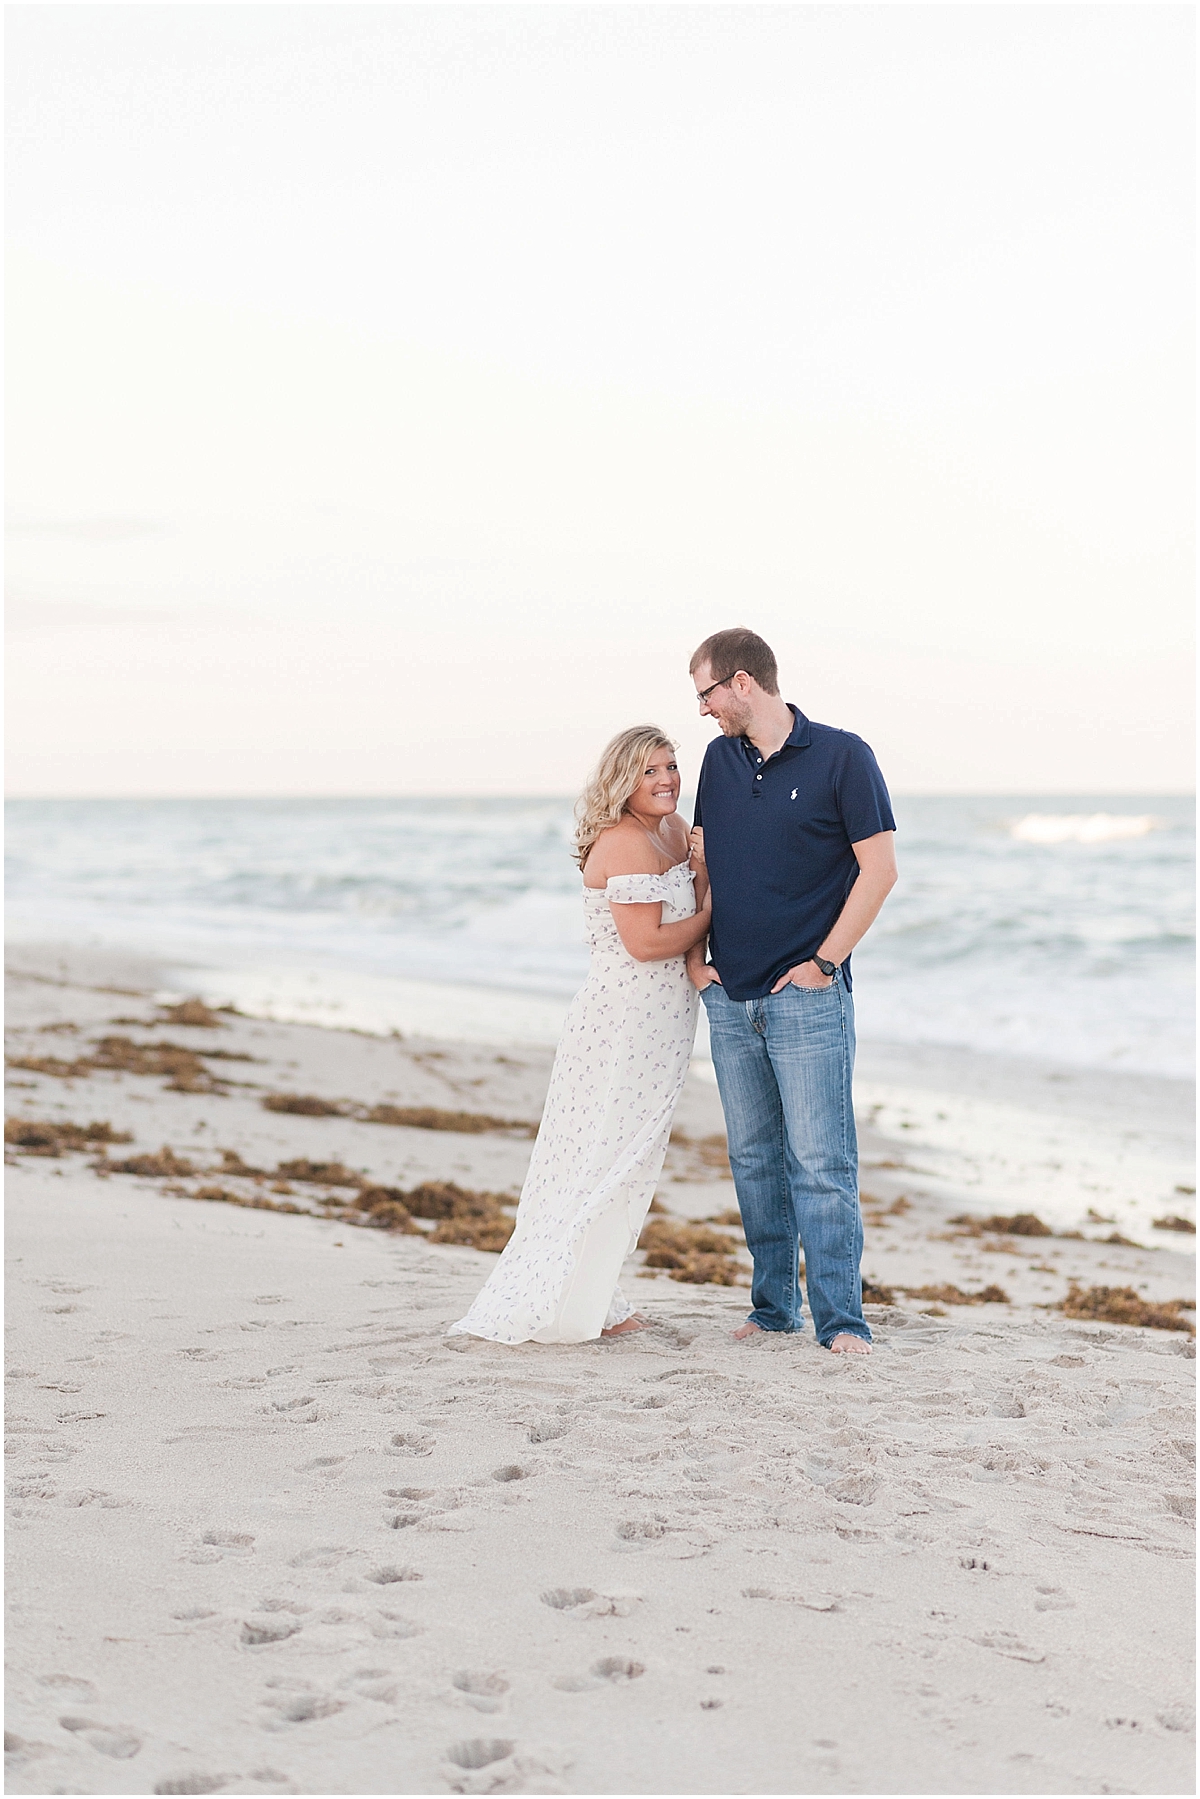 Melbourne Beach Florida Engagement Session In Melbourne Florida Pipers Photography, Romantic beach engagement session, coastal session, sunset beach session 